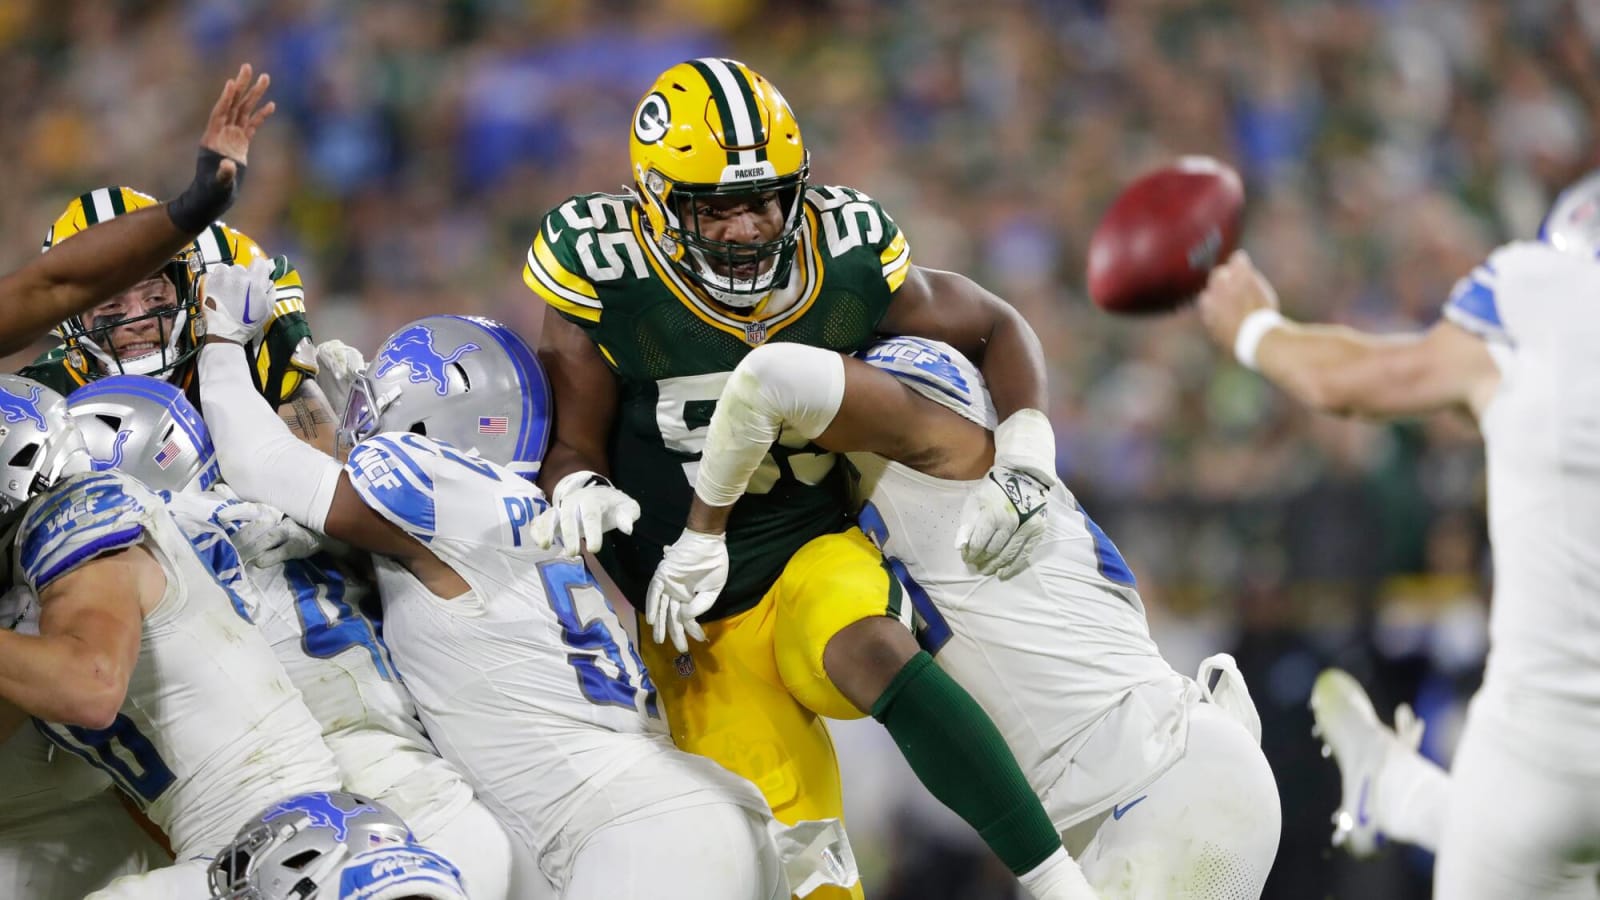  The Green Bay Packers Fear that one of their Pass Rushers tore their ACL.